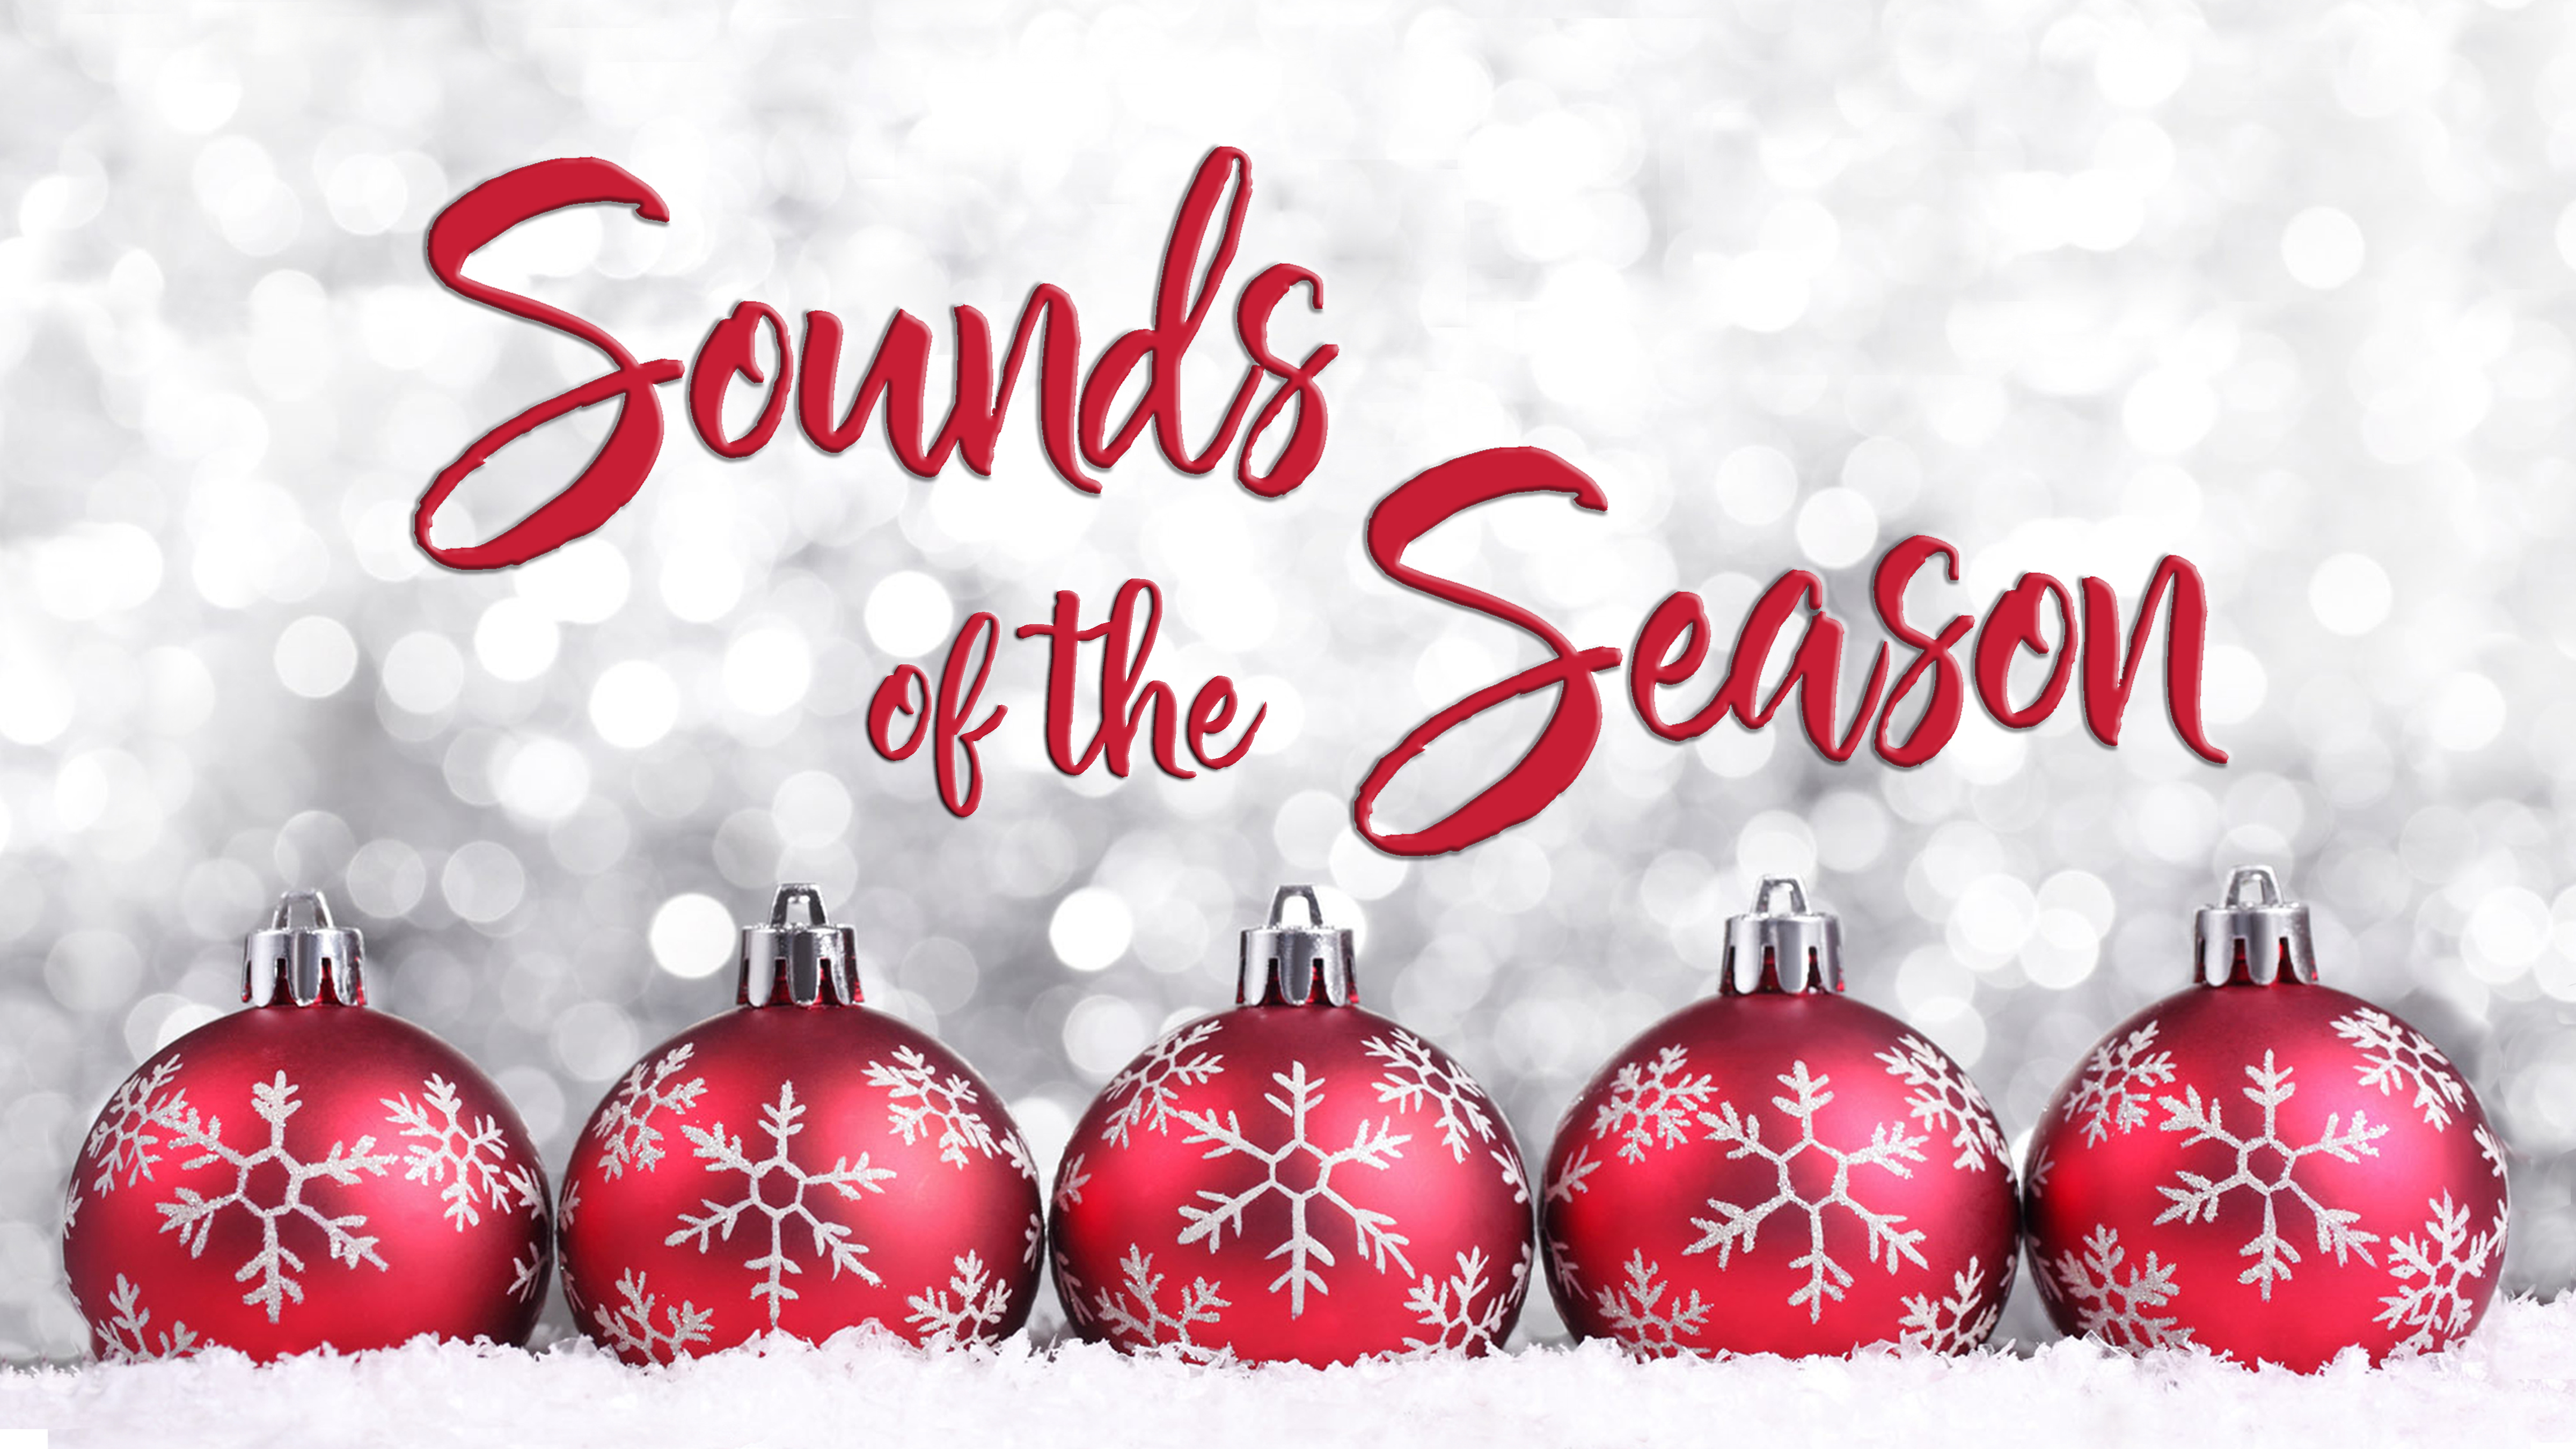 Medalist Sounds of the Season graphic 2023